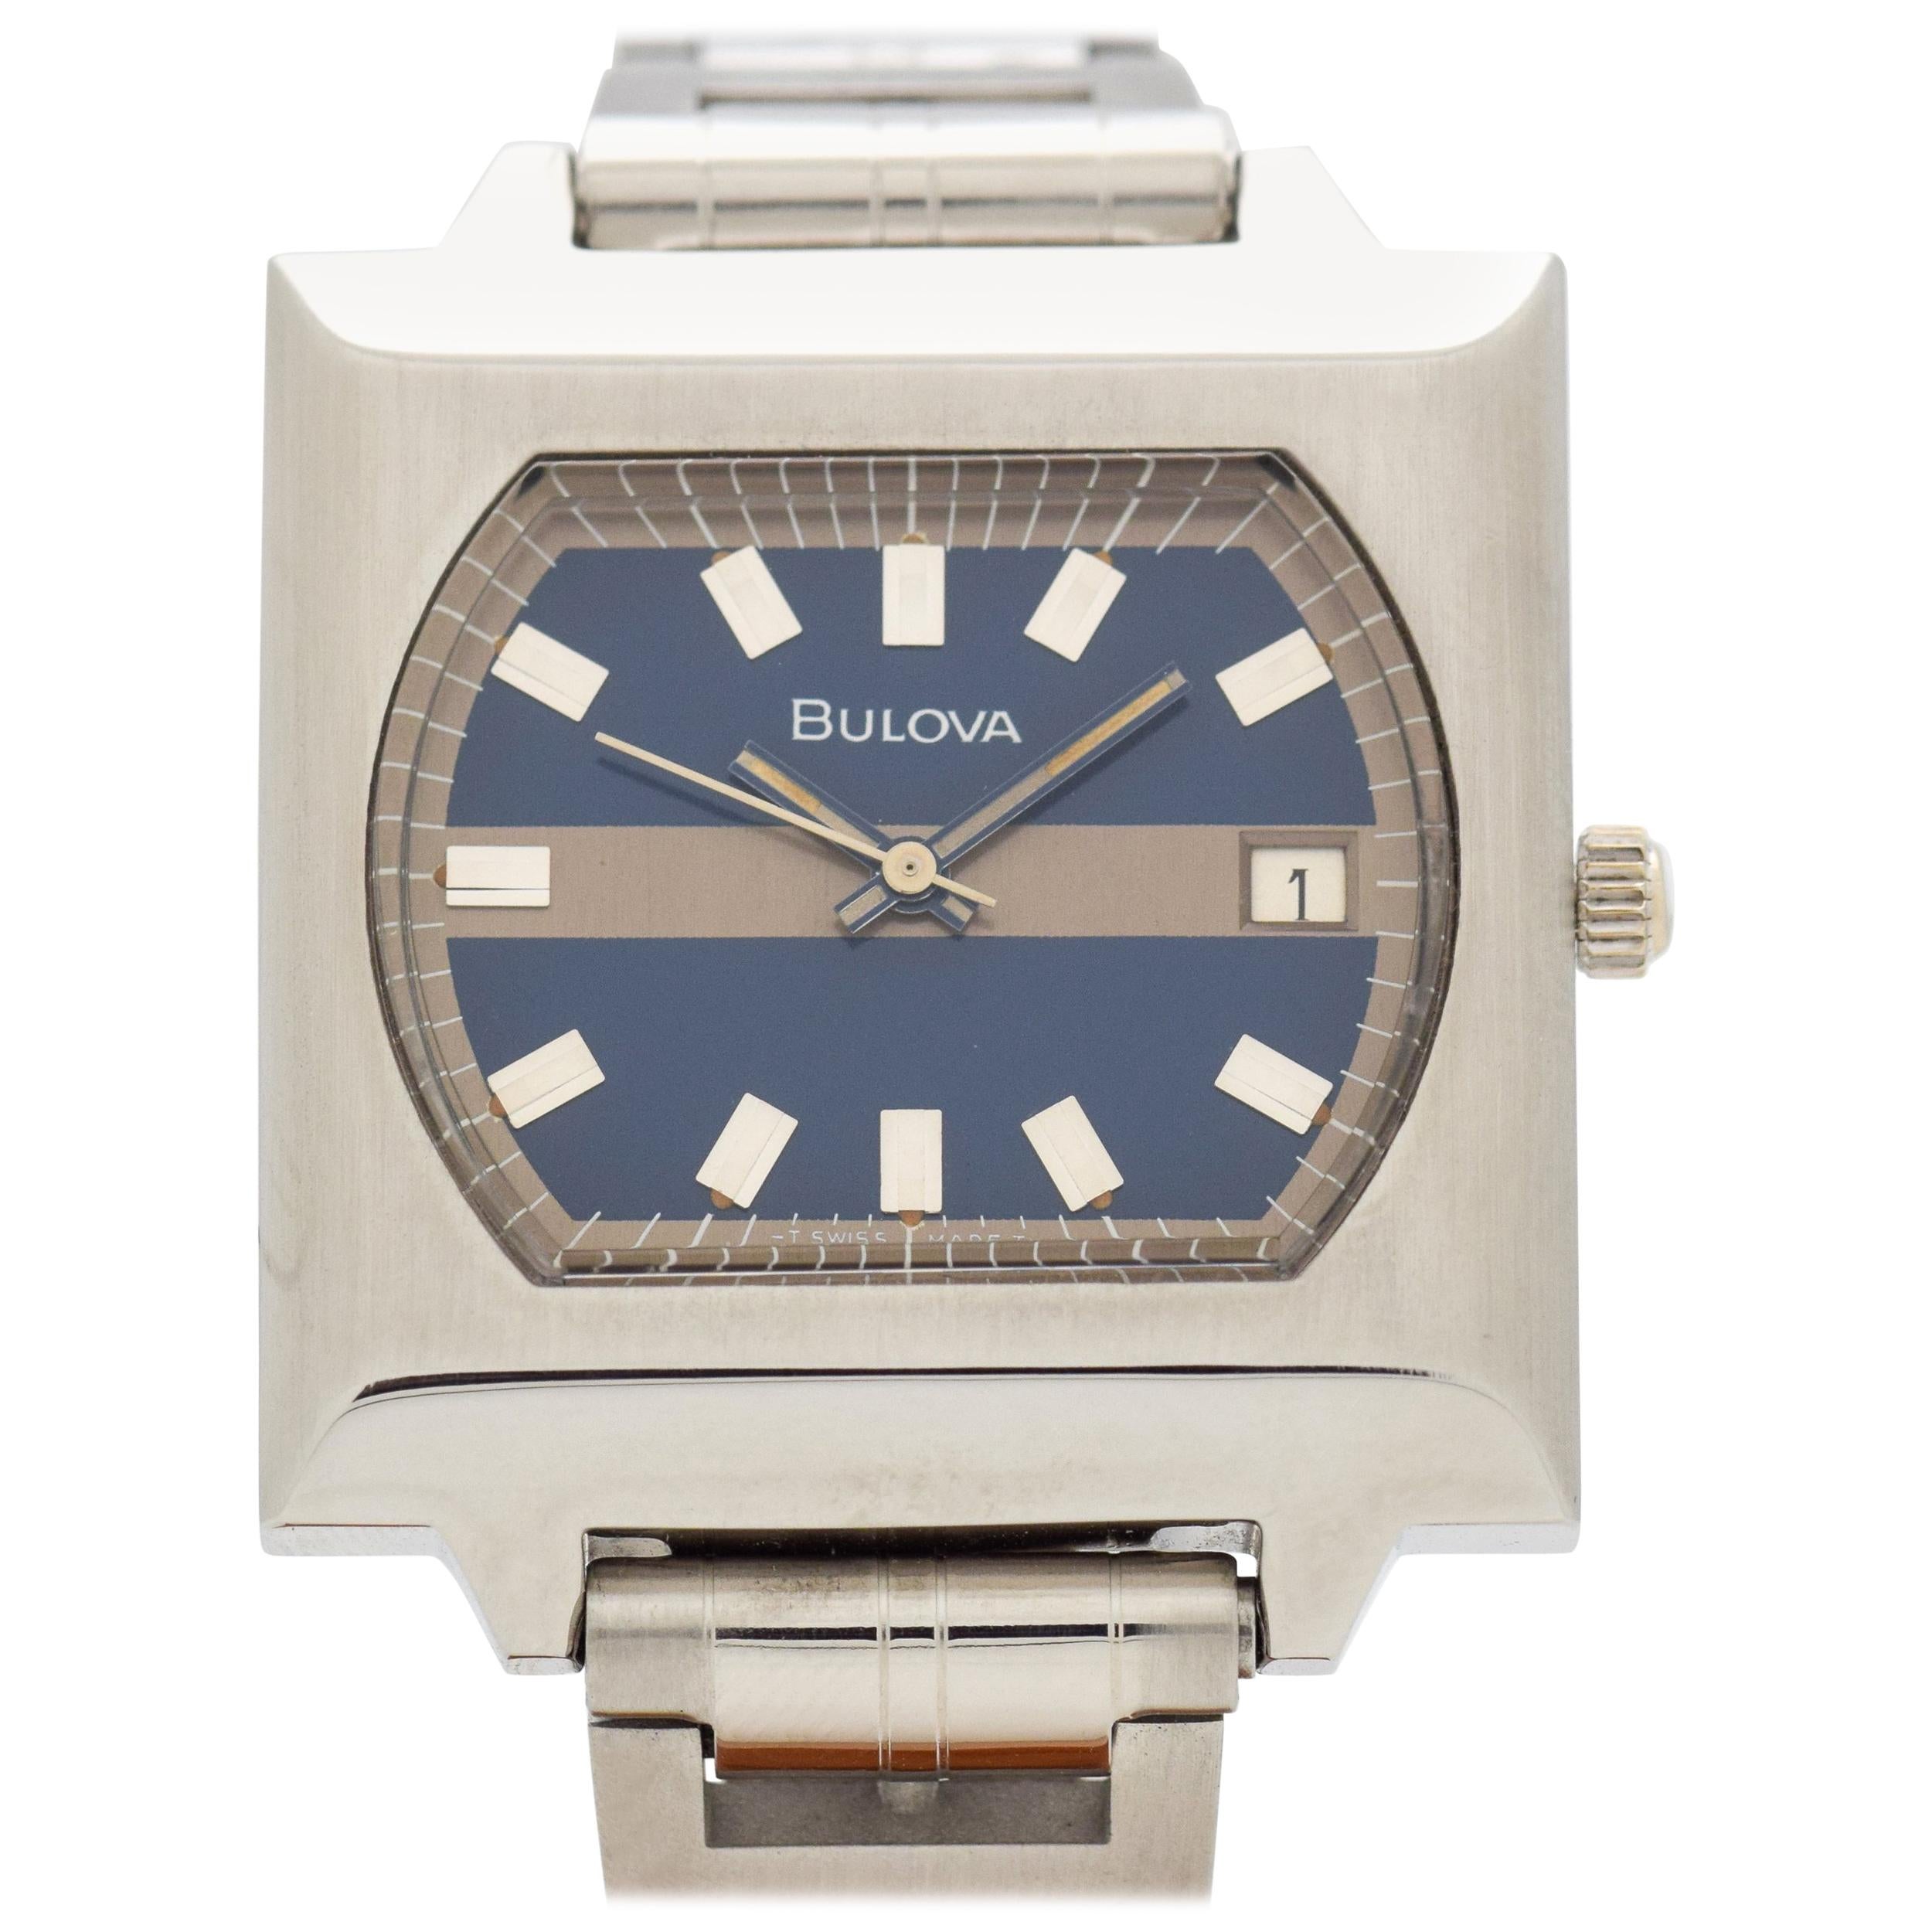 Vintage Bulova Reference T-3463 Square-Shaped Watch, 1973 For Sale